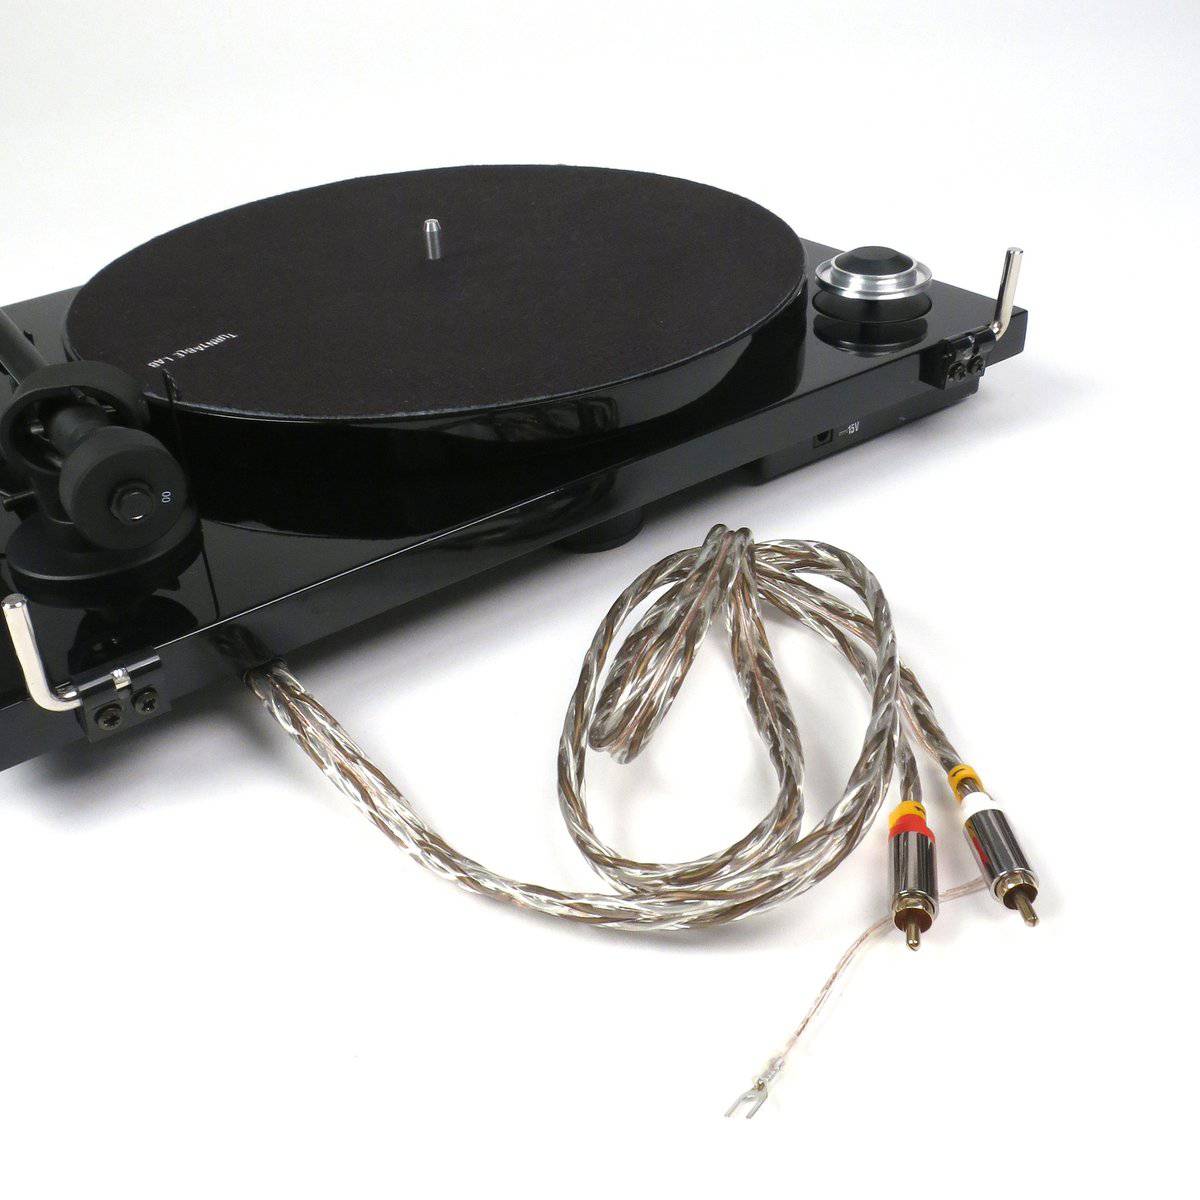 Pro-ject Essential